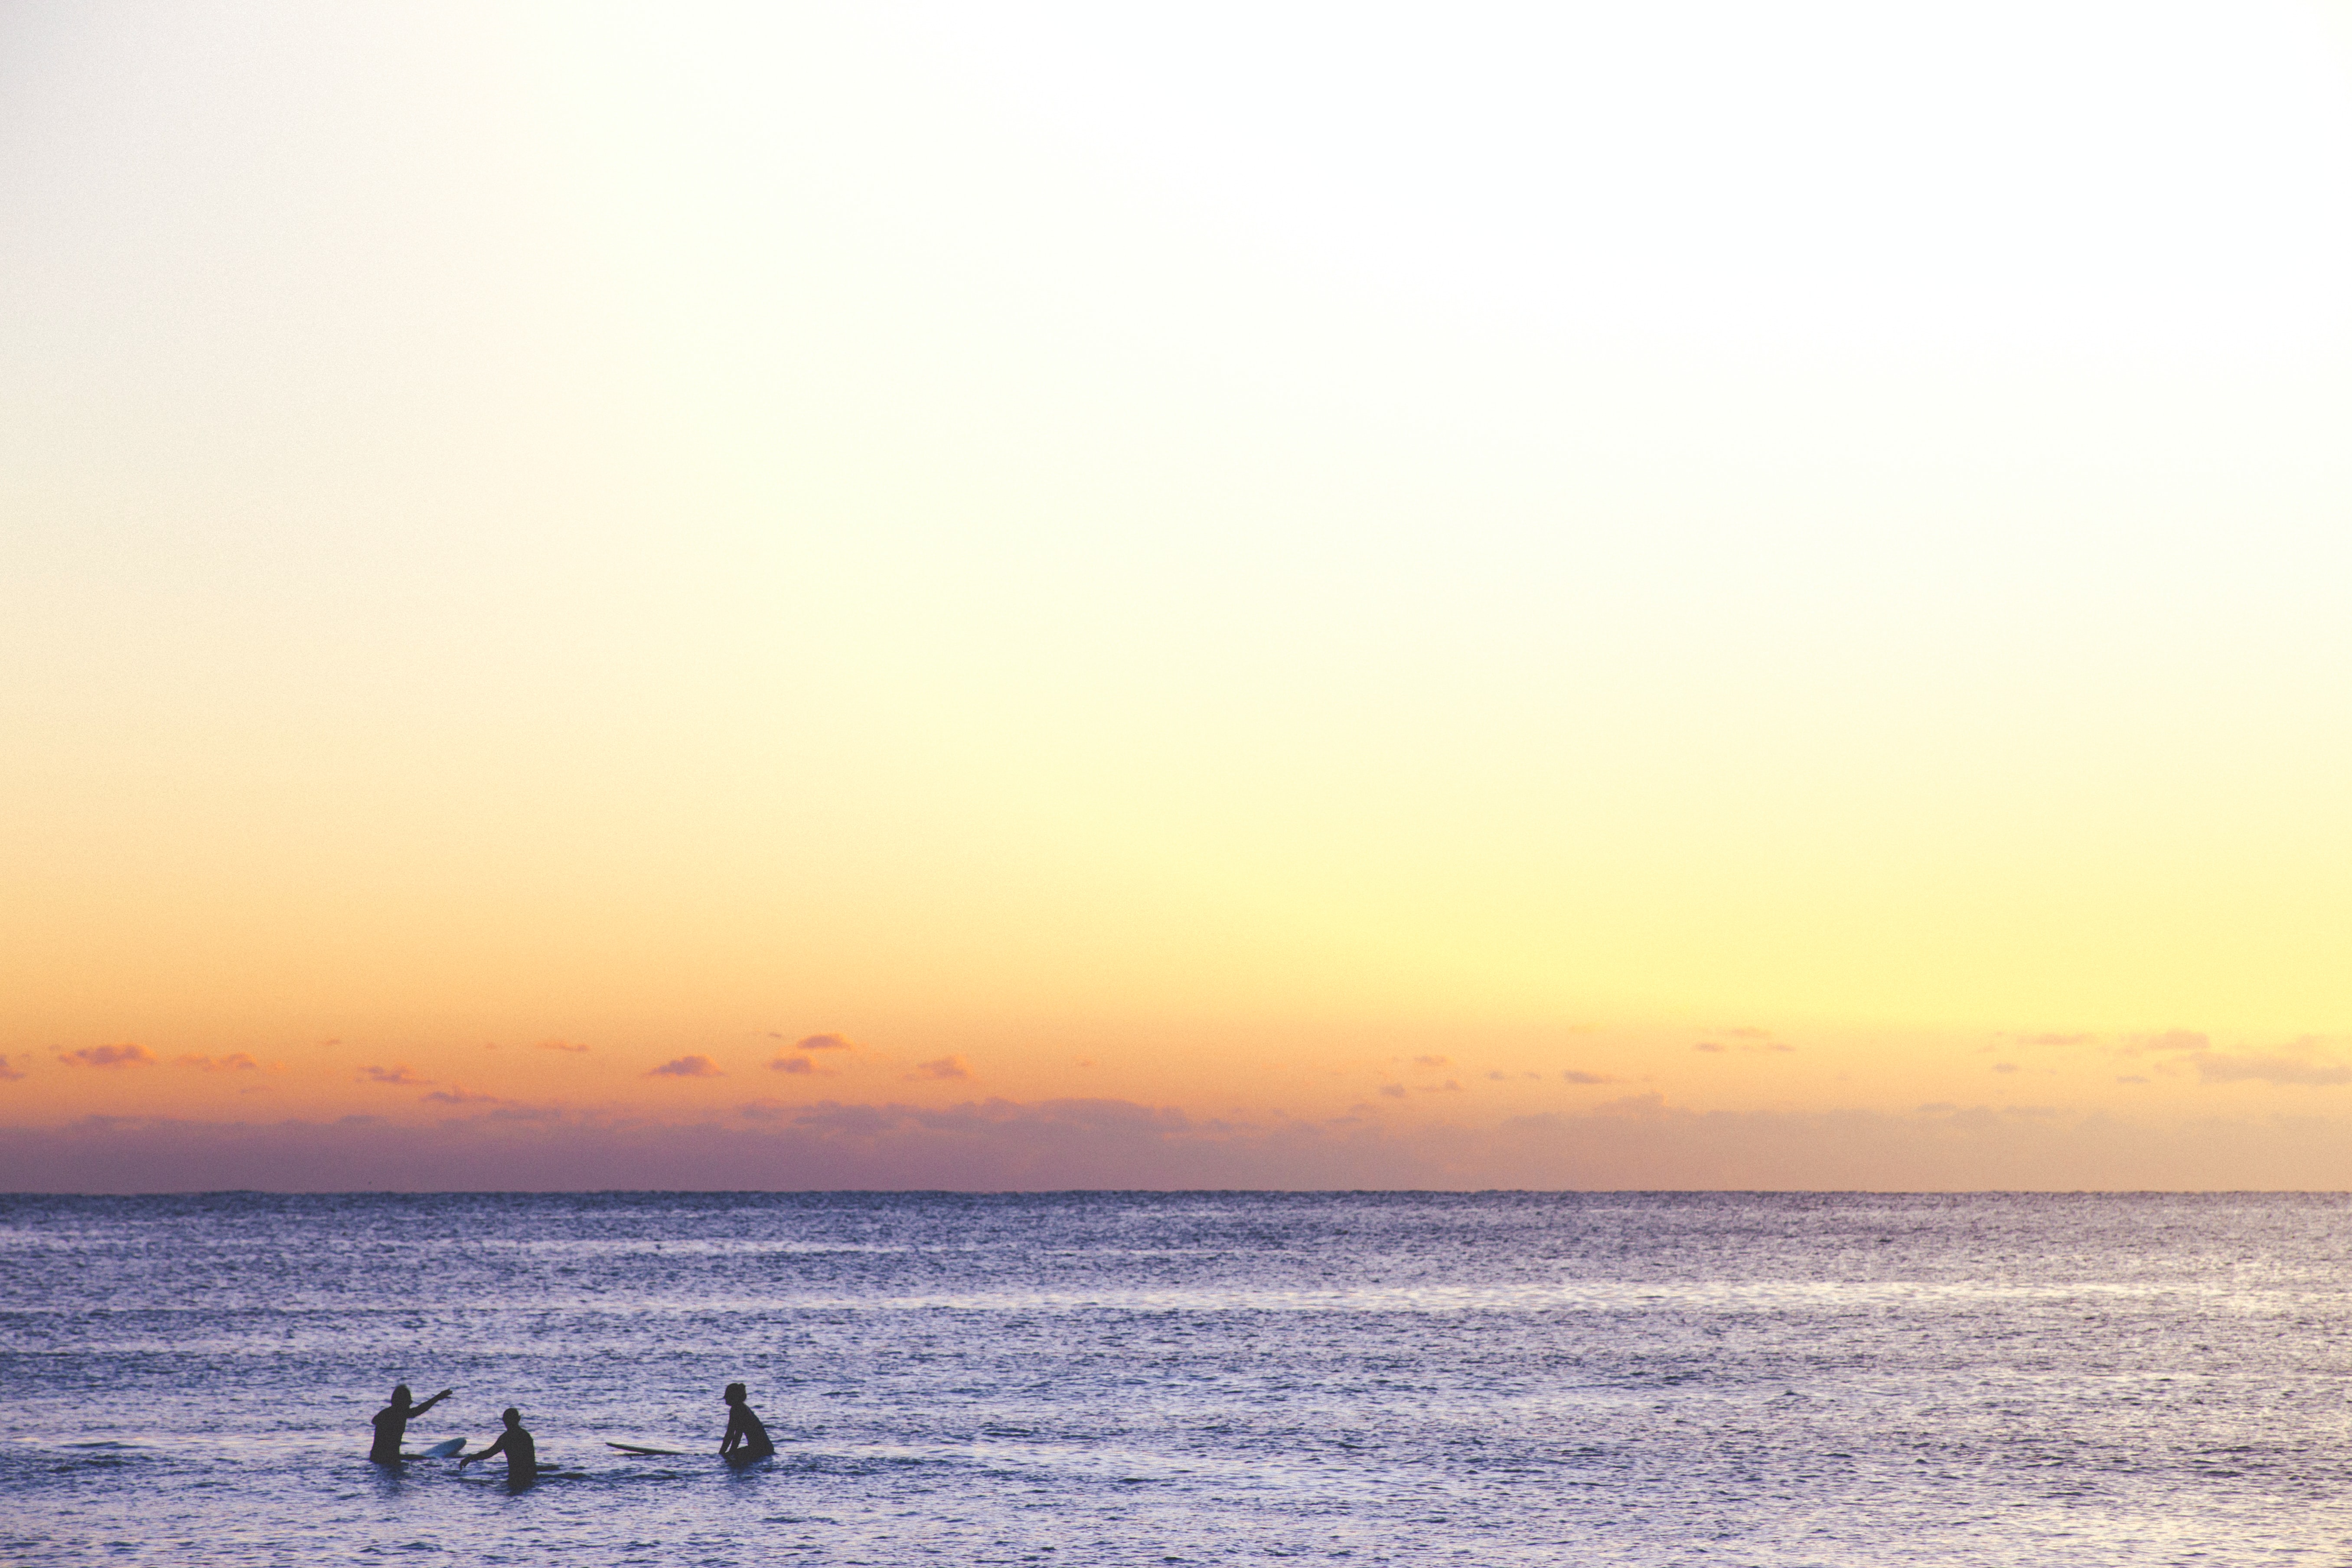 A group of surfers on a calm ocean